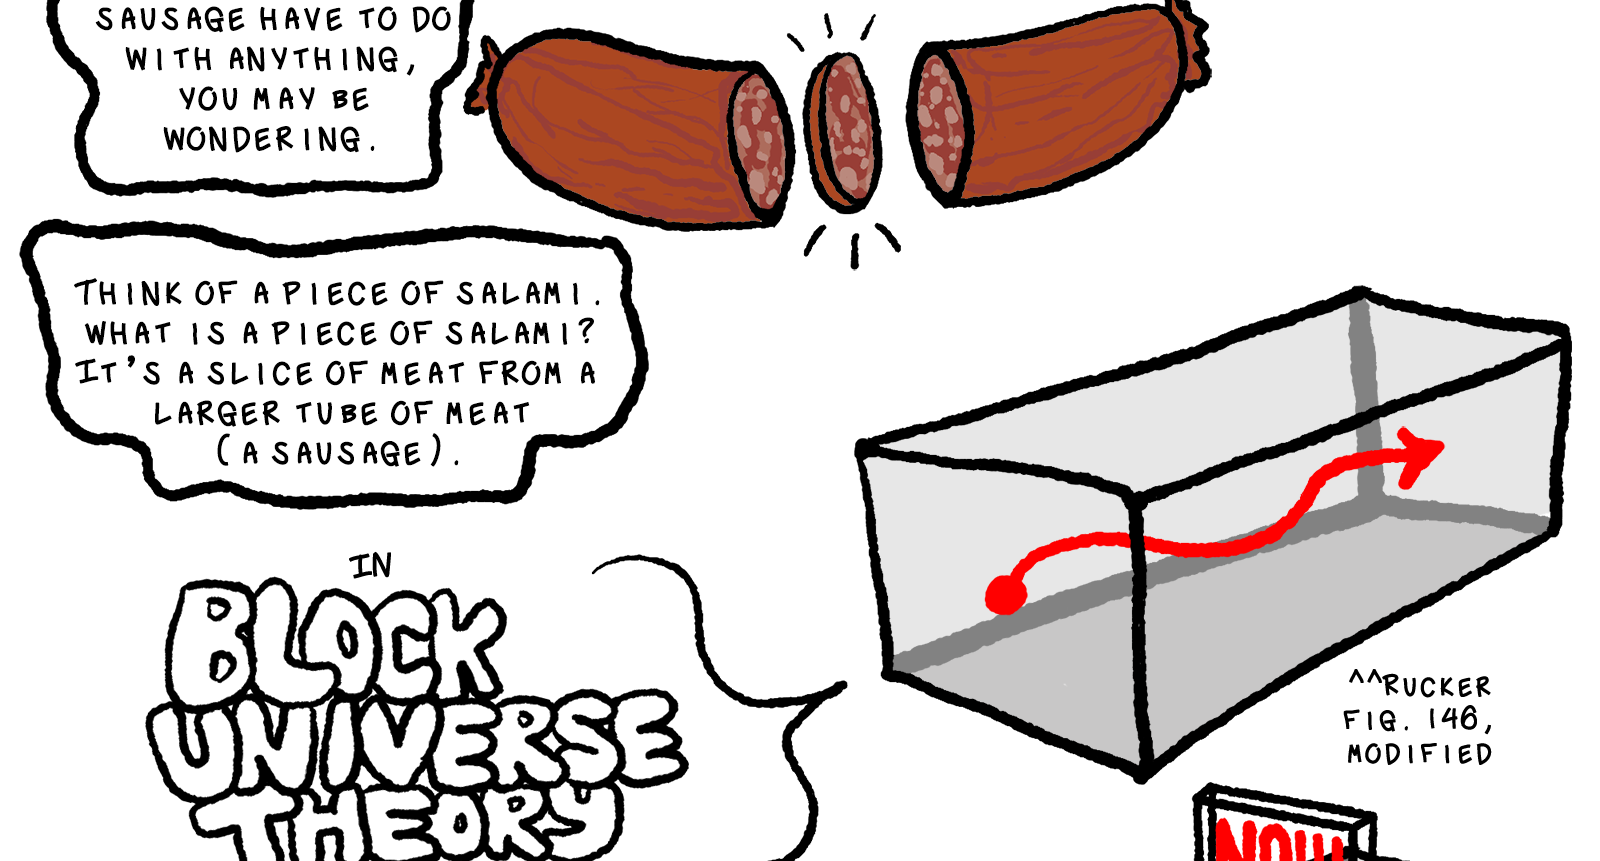 Pictured is the salami sliced down the middle to make a single slice of salami. Elk continues, think of a piece of salami. What is a piece of salami? It's a slice of meat from a larger tube of meat (a sausage). In bubble letters, it reads in Block Universe Theory, we think of the universe as a 4-dimensional block of spacetime. Any and all events, past present and future, and all matter exist in one unmoving 4-dimensional chunk. Pictured is a modified Rudy Rucker diagram fig. 146, which shows a long see-through rectangle with a red line traversing it from one end to the other. On the side of the rectangle facing the viewer is a point (the start of the segment) and the line ends with an arrow, implying it continuing at the opposite end of the rectangle.